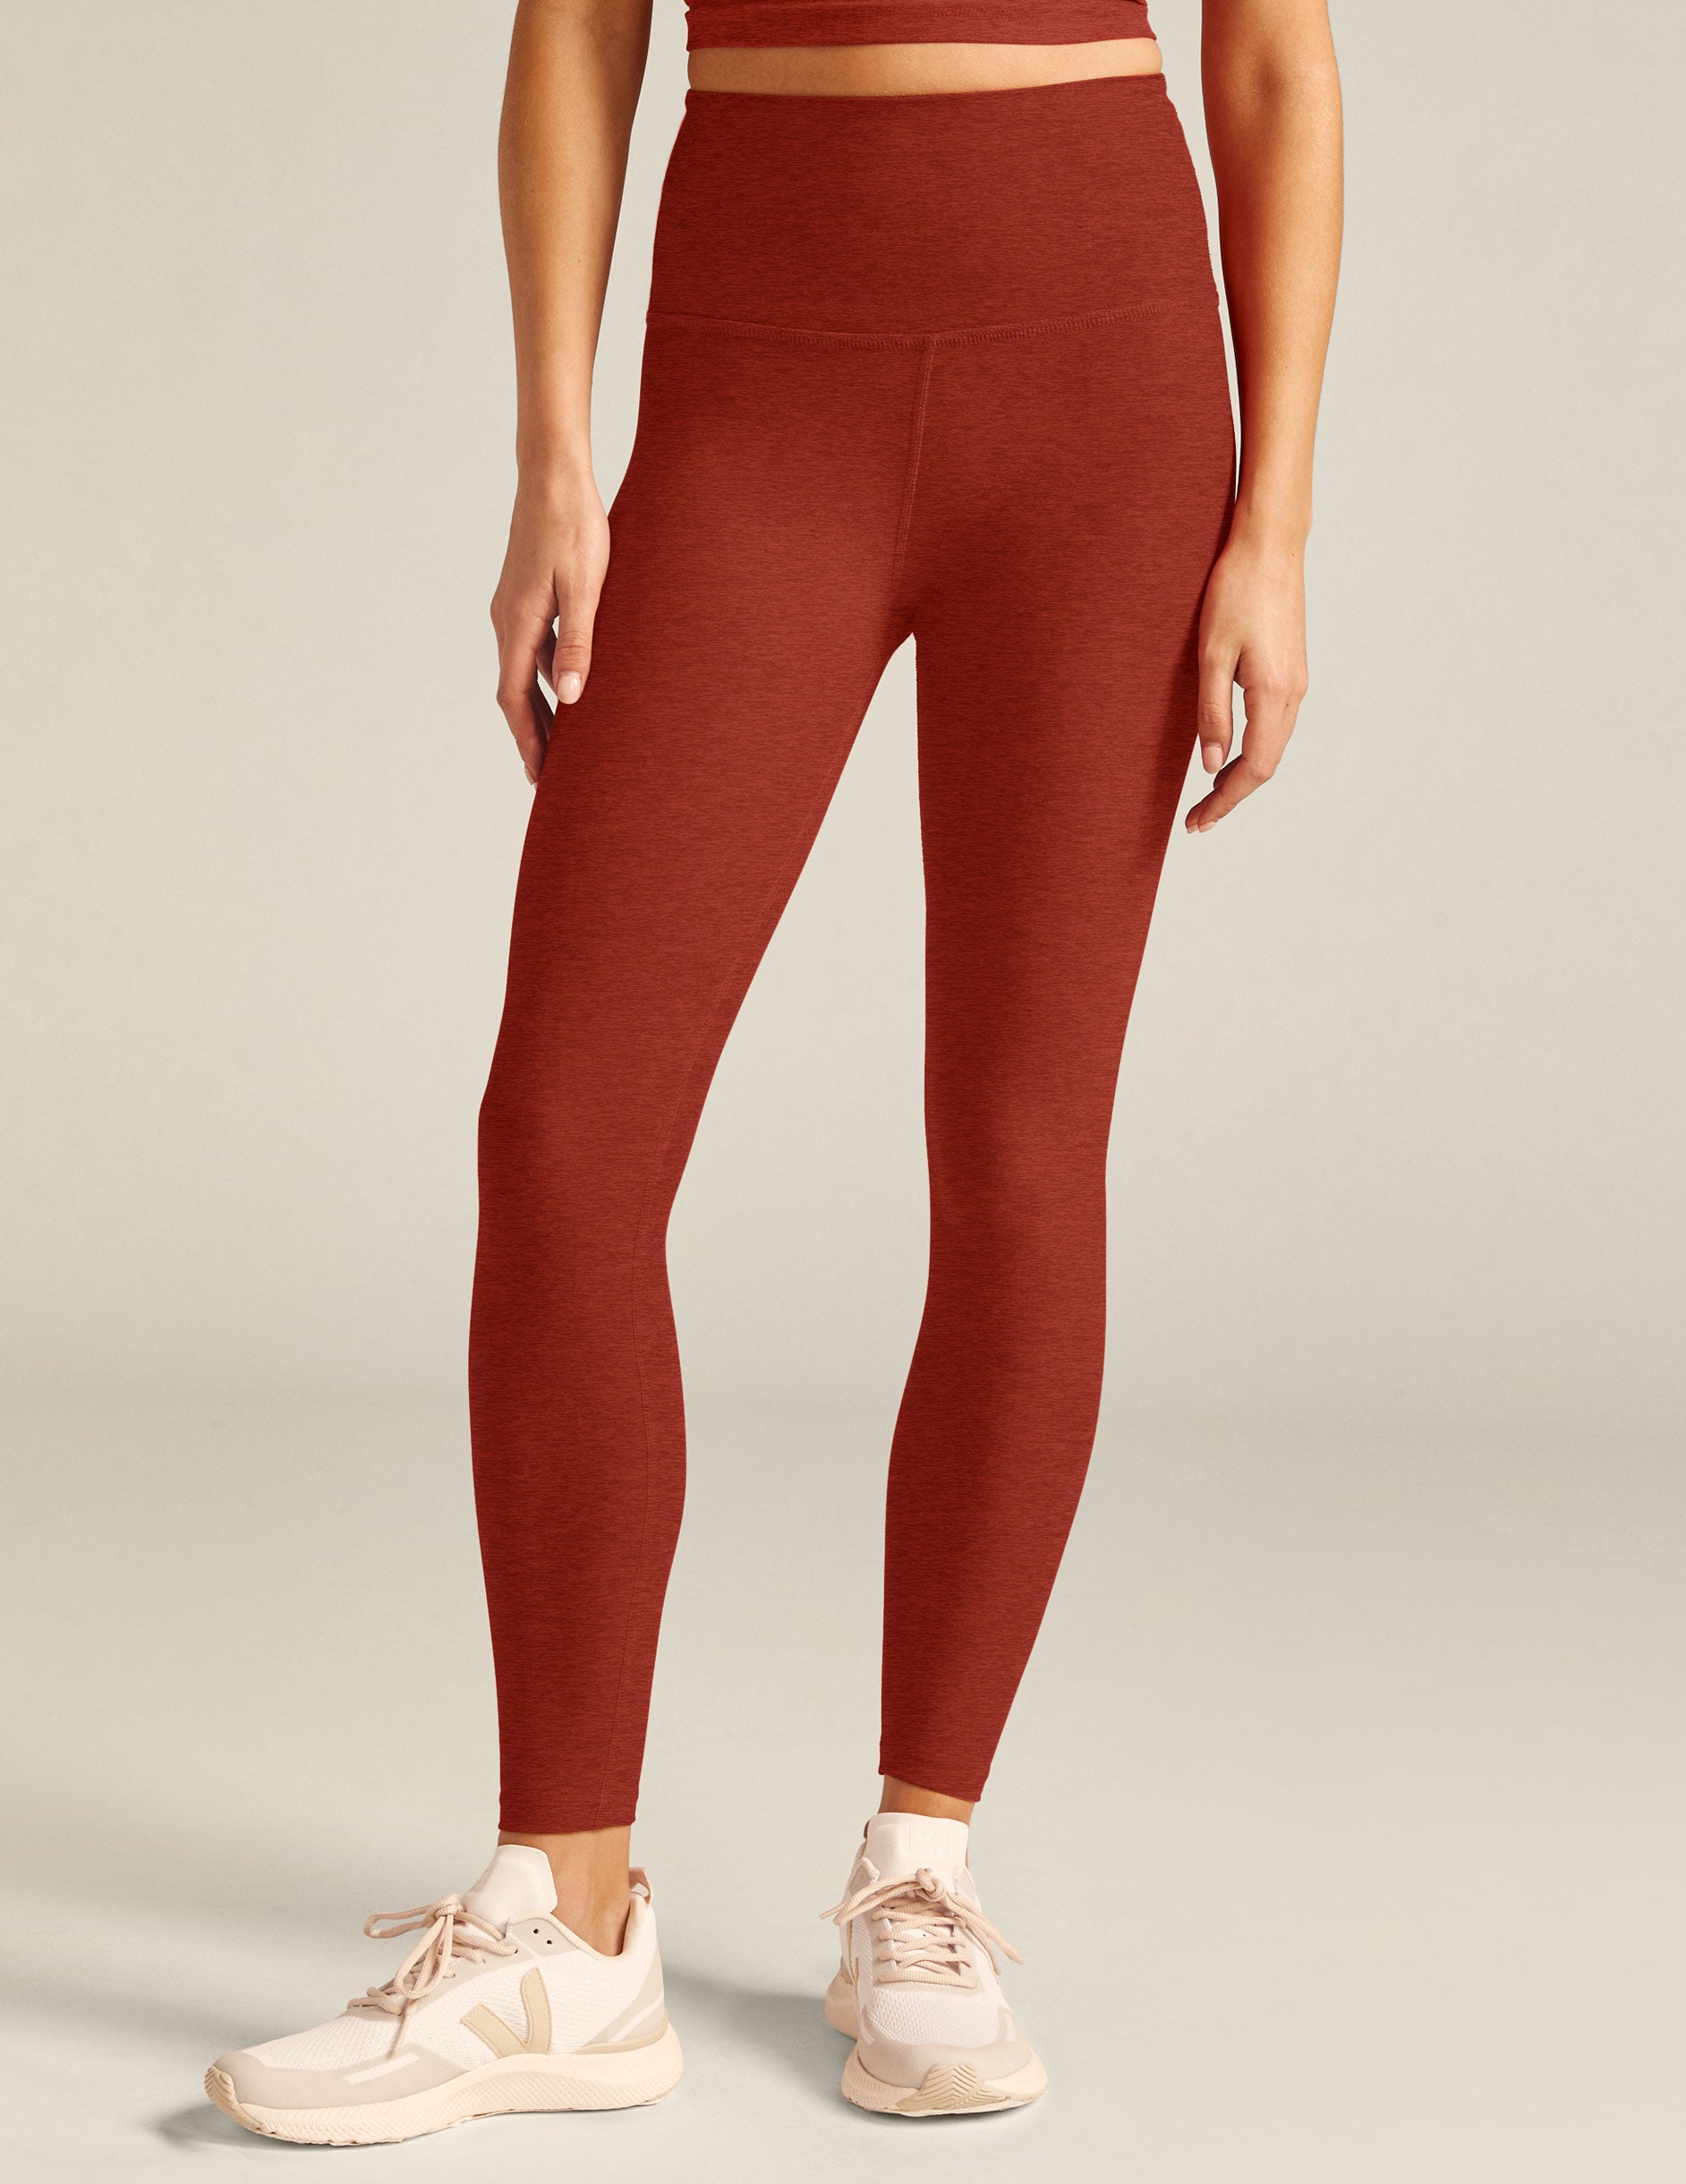 Beyond Yoga Spacedye Outlines High-Waisted Midi Leggings  Anthropologie  Singapore - Women's Clothing, Accessories & Home